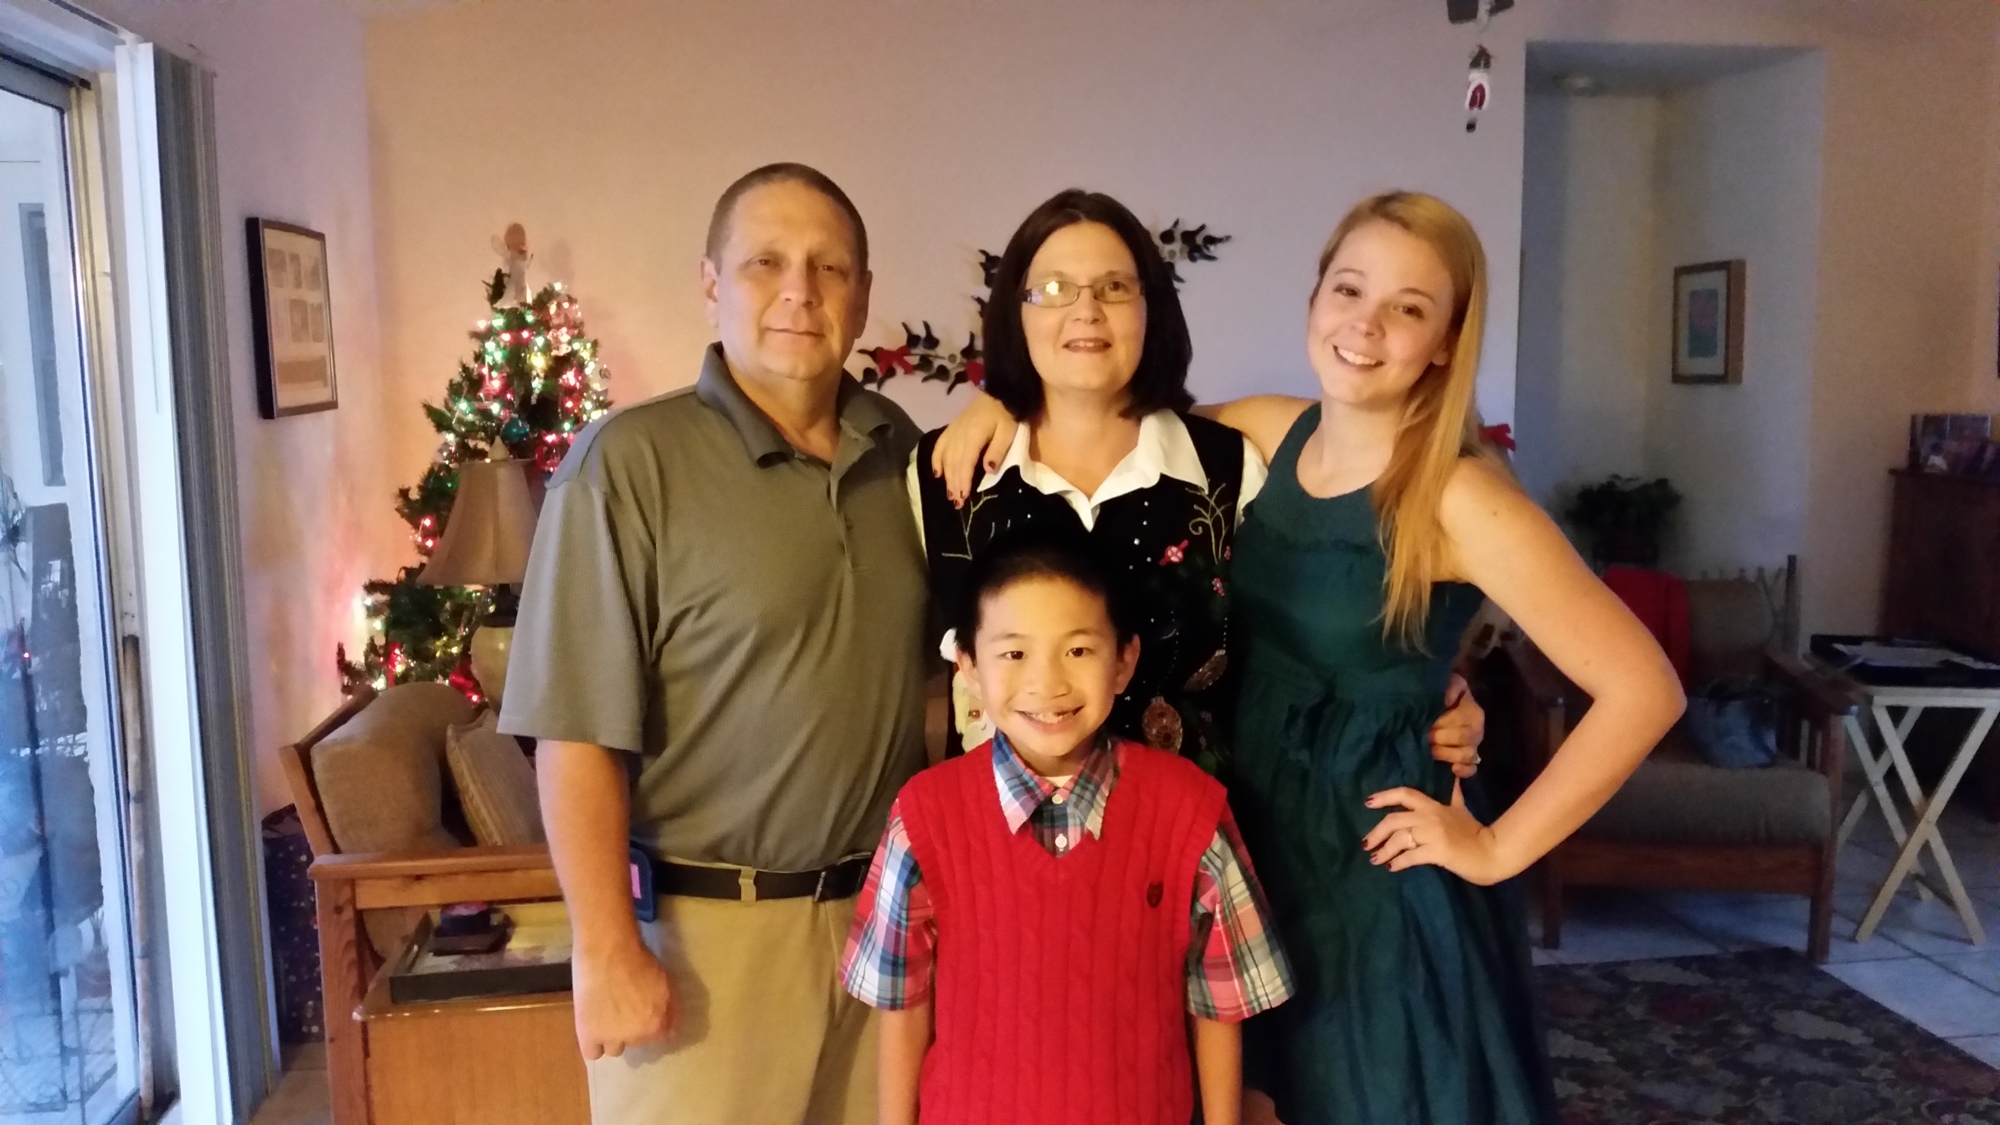 Mitch and Lisa Gray and their son, Jack, are eager to meet the newest member of their family from China. They hope to travel together in the next month to adopt Grant and bring him home. With them is one of their daughters, Rachel.